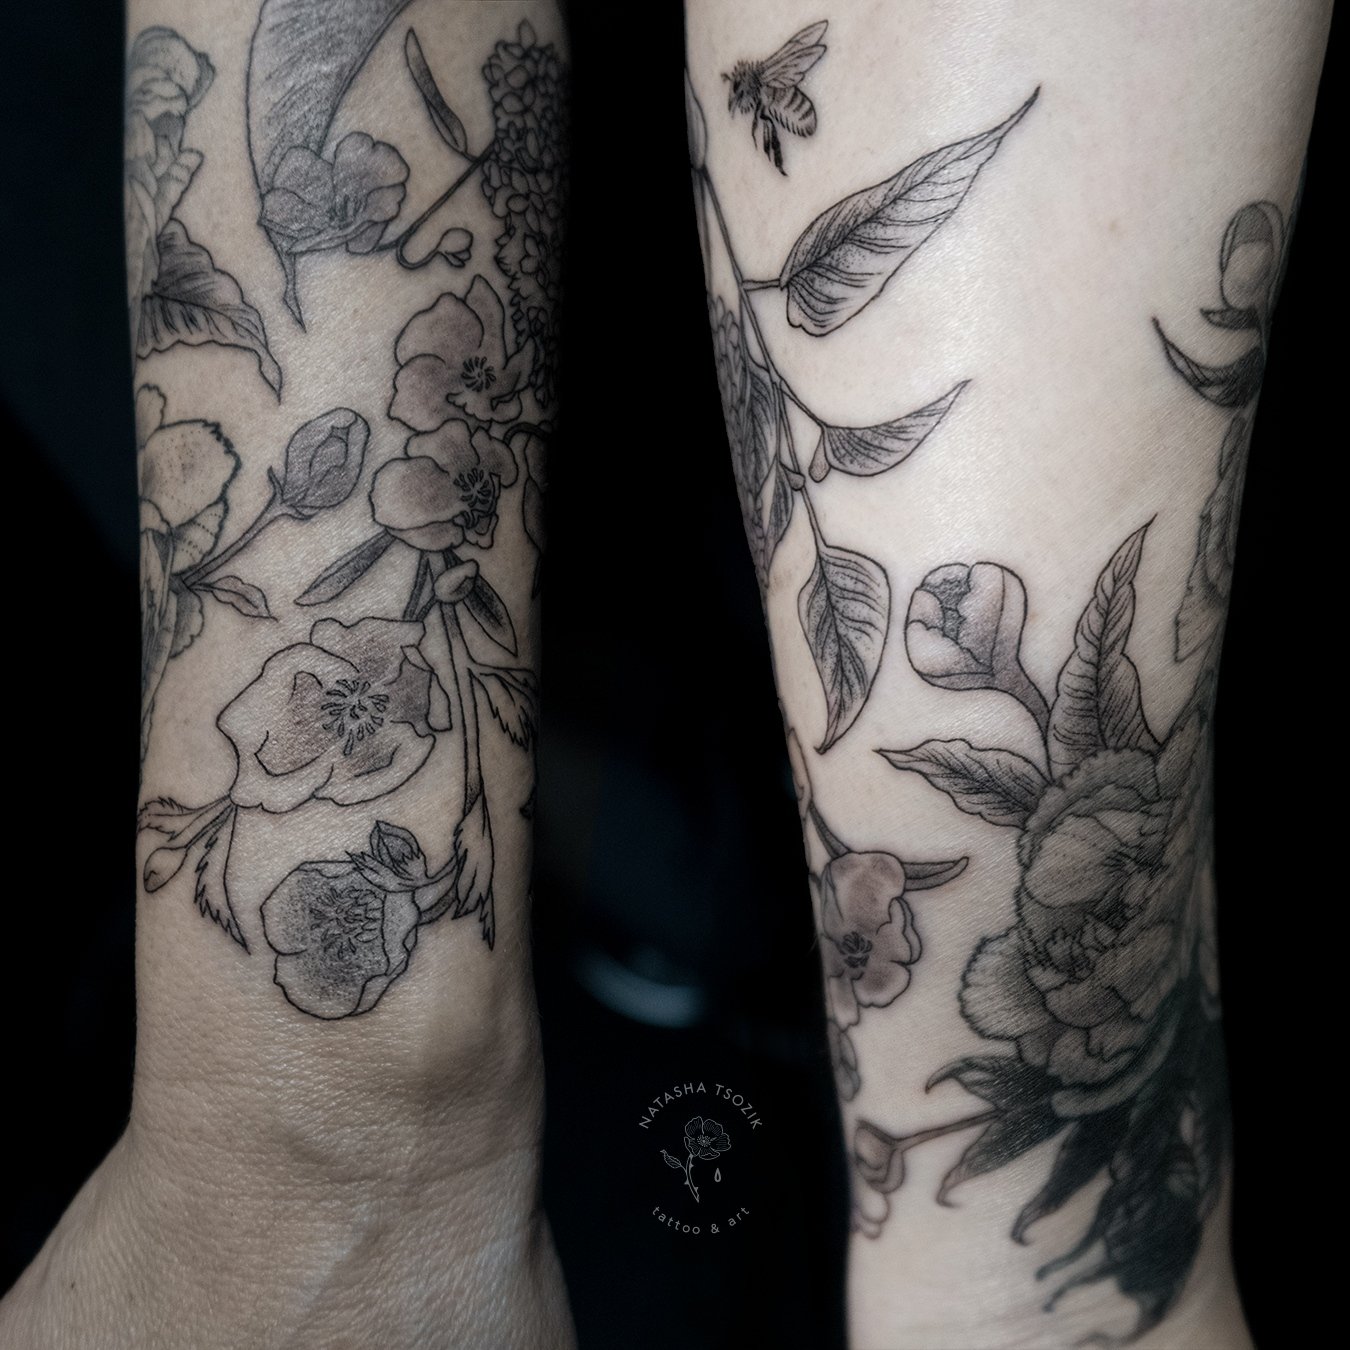 Details of a floral half-sleeve tattoo